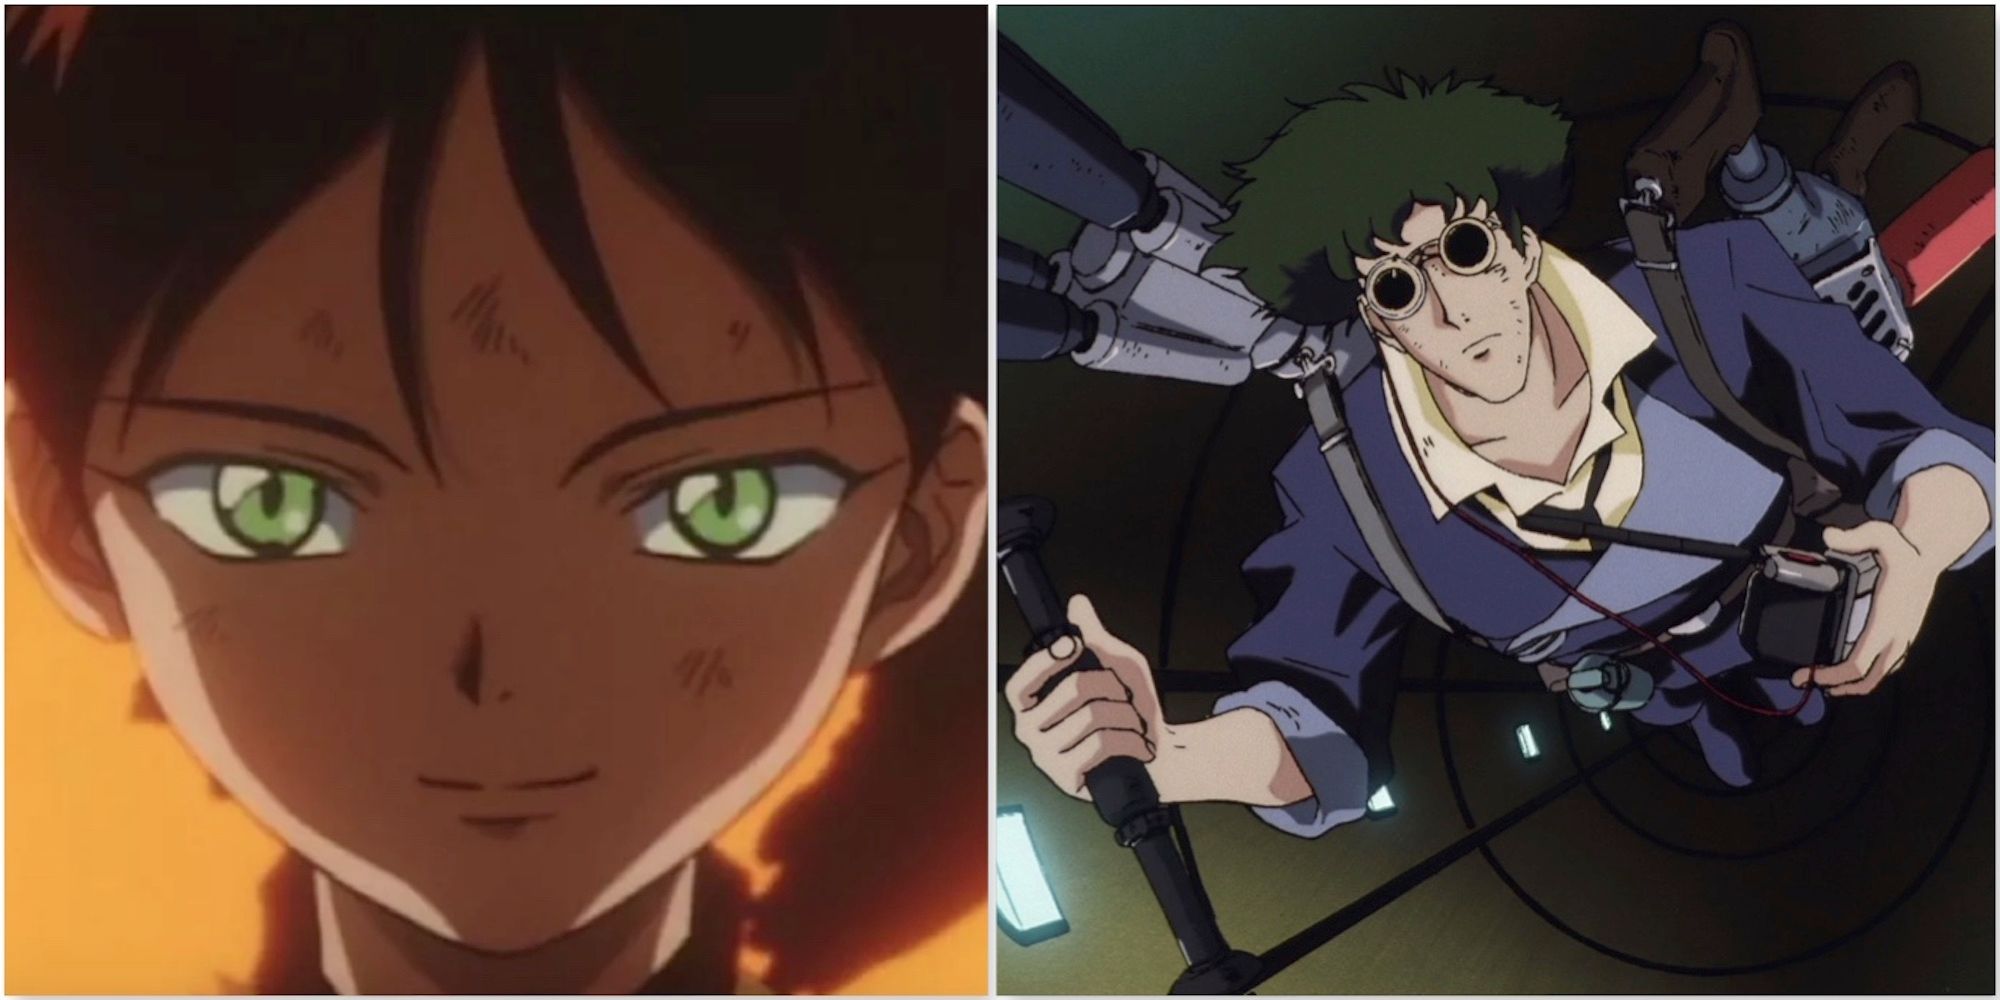 Cowboy Bebop anime moves from hulu to Netflix ahead of liveaction debut   EWcom